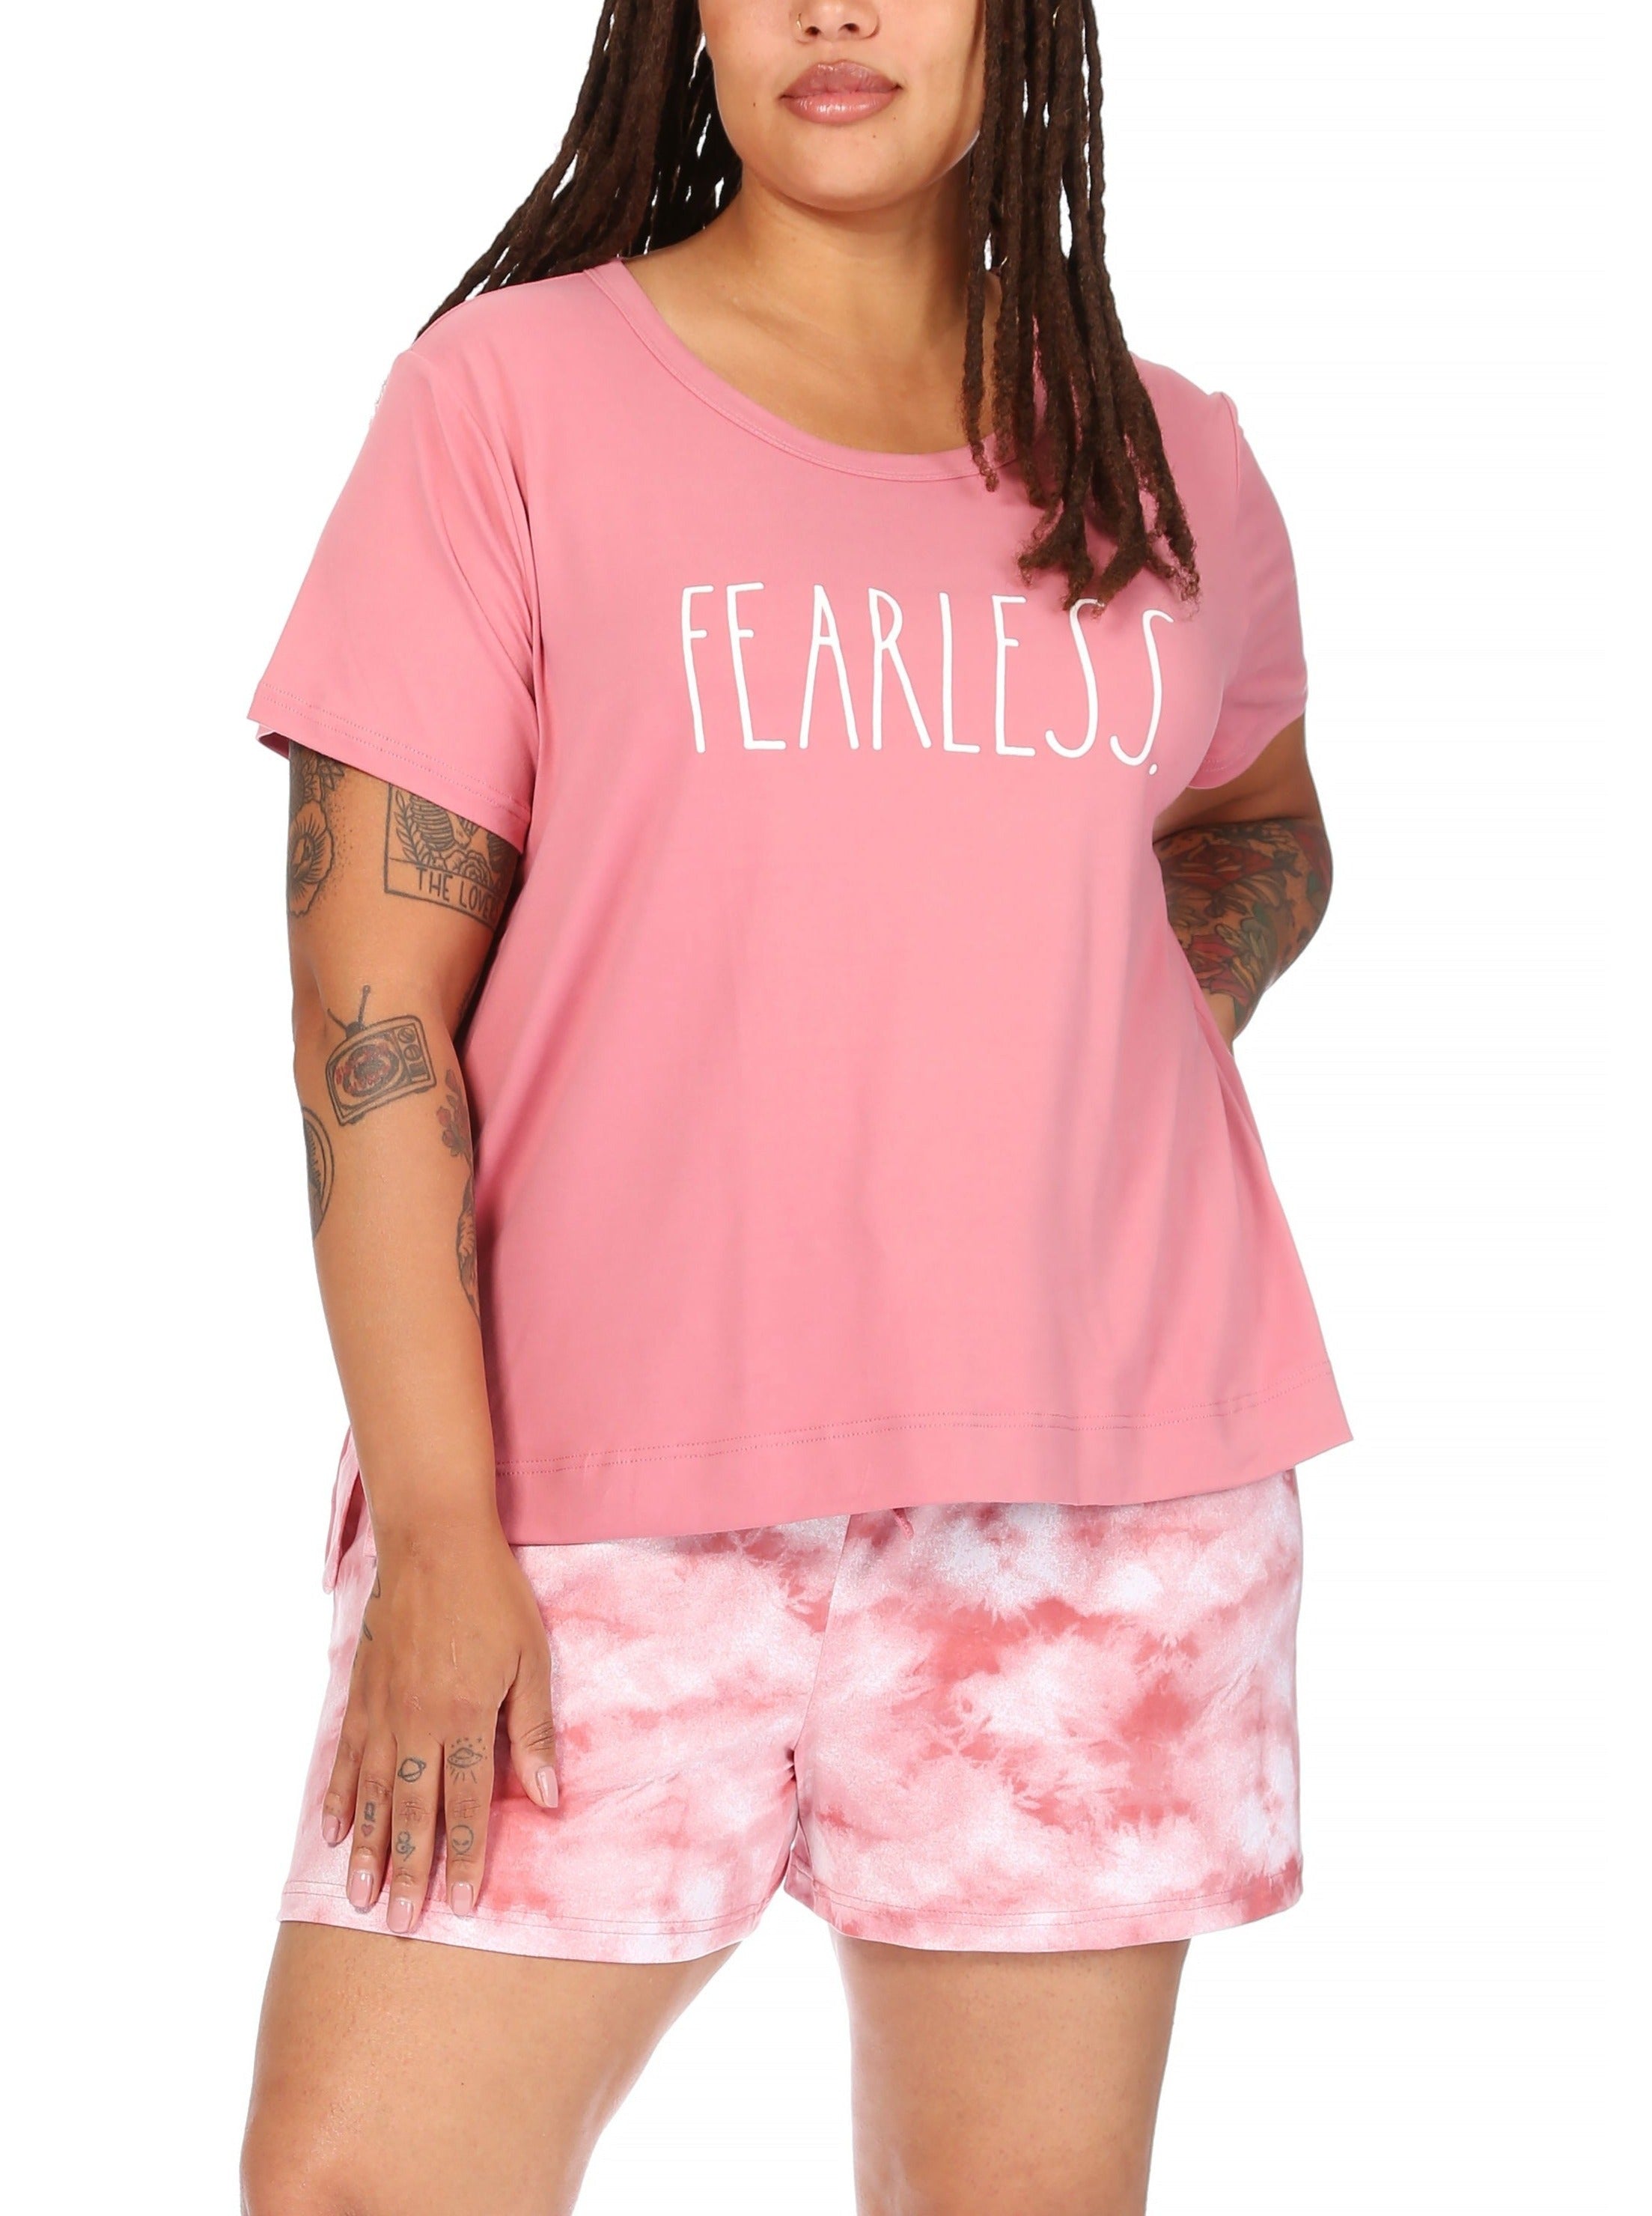 Women's Plus Size "FEARLESS" Short Sleeve Side Slit Top and Short Pajama Set - Rae Dunn Wear